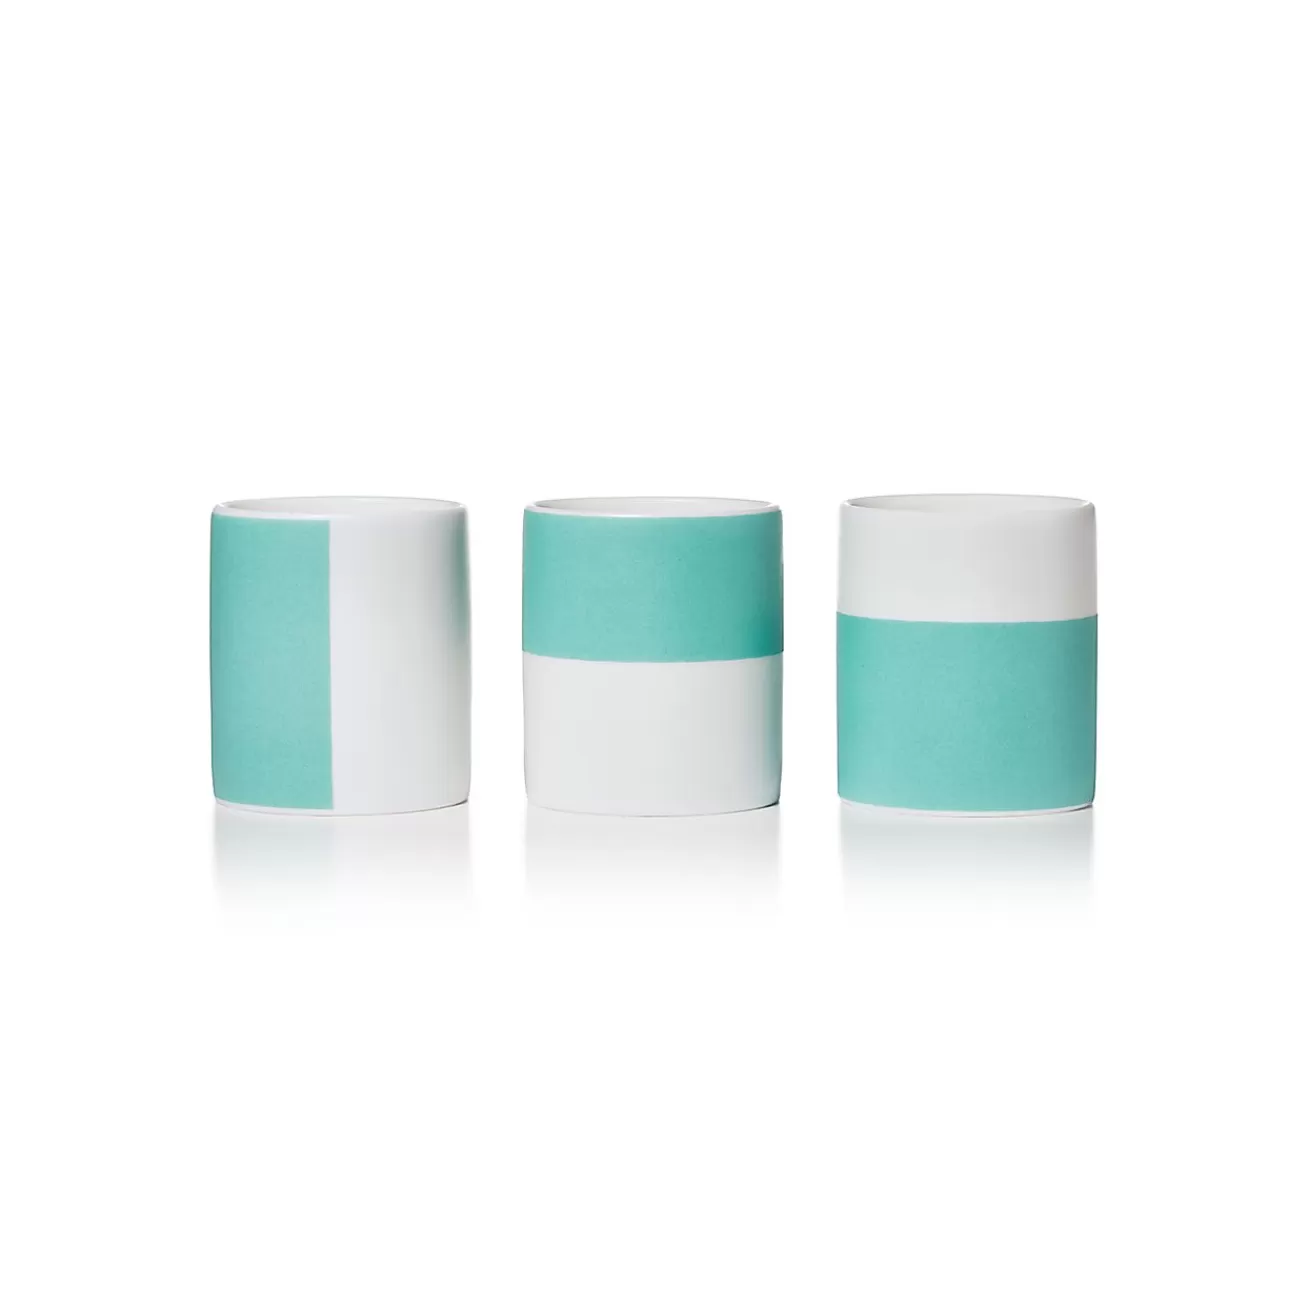 Tiffany & Co. Color Block travel candles in bone china Color Block vessels, set of three. | ^ Decor | Candles